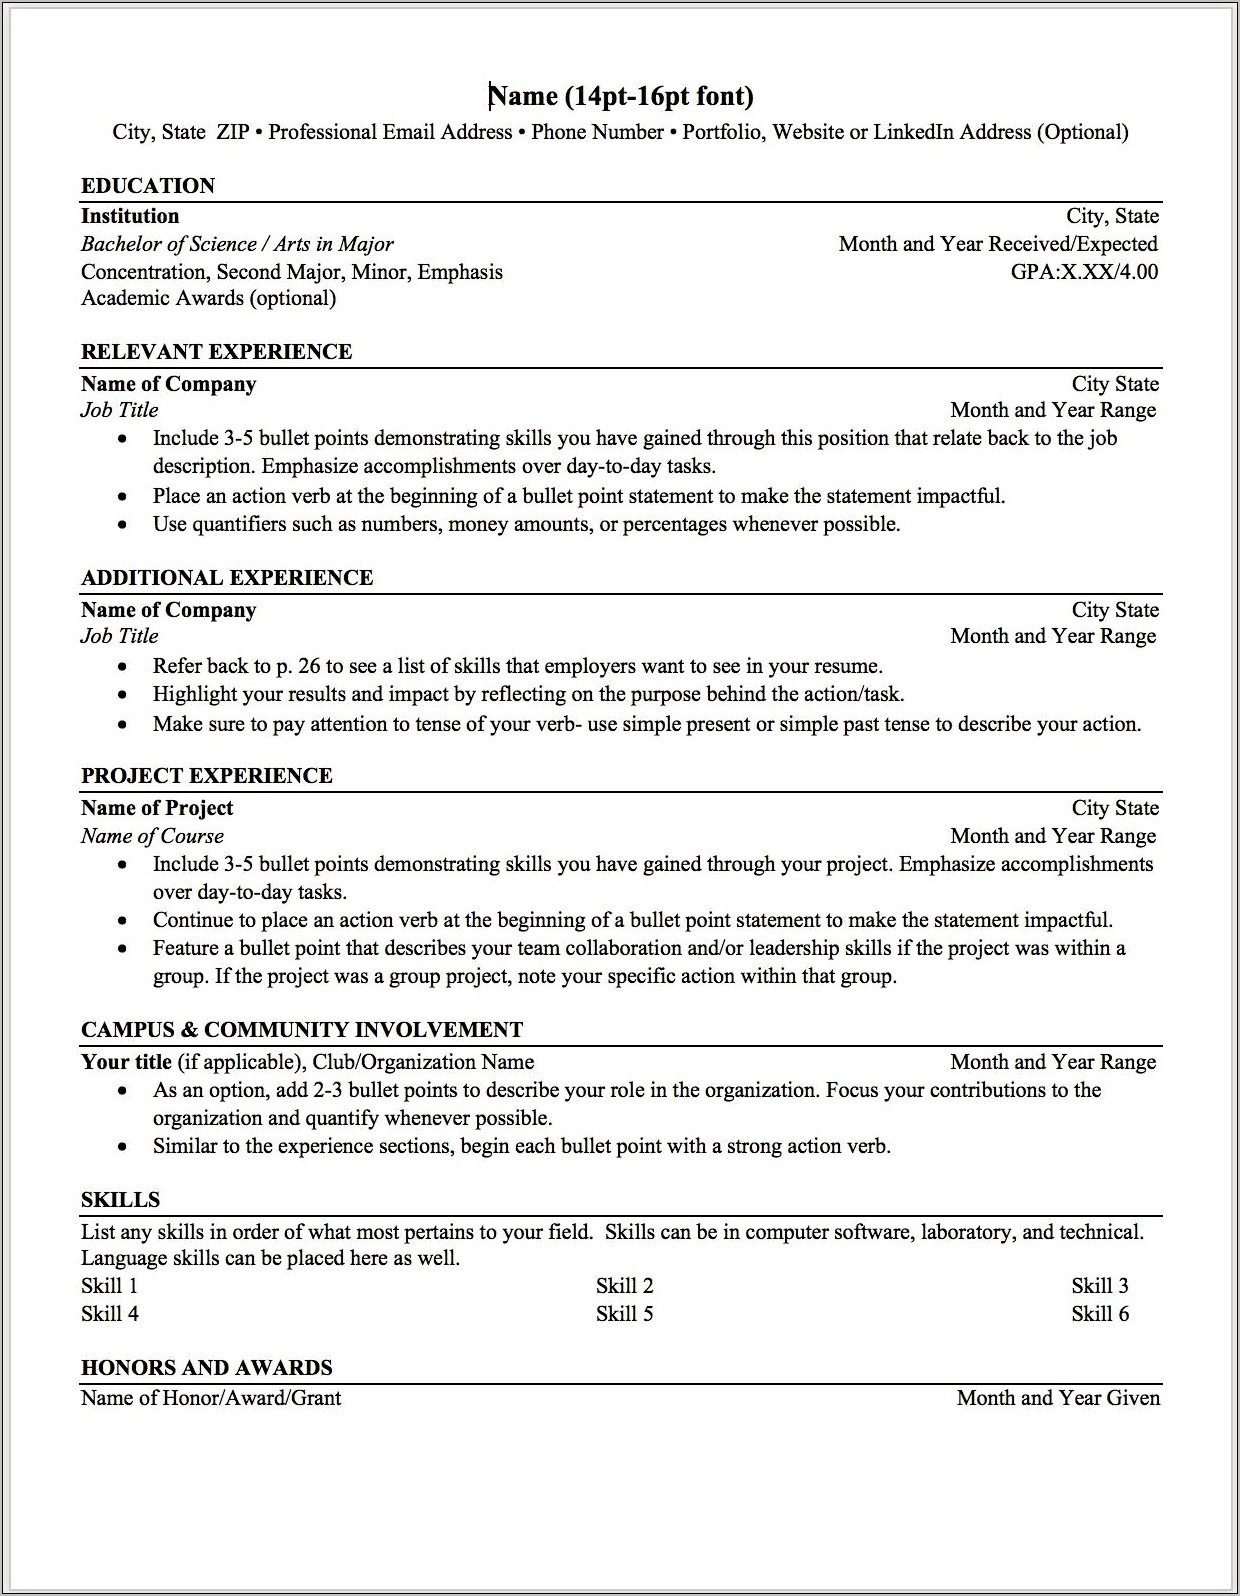 Resume Examples With Salary Requirements